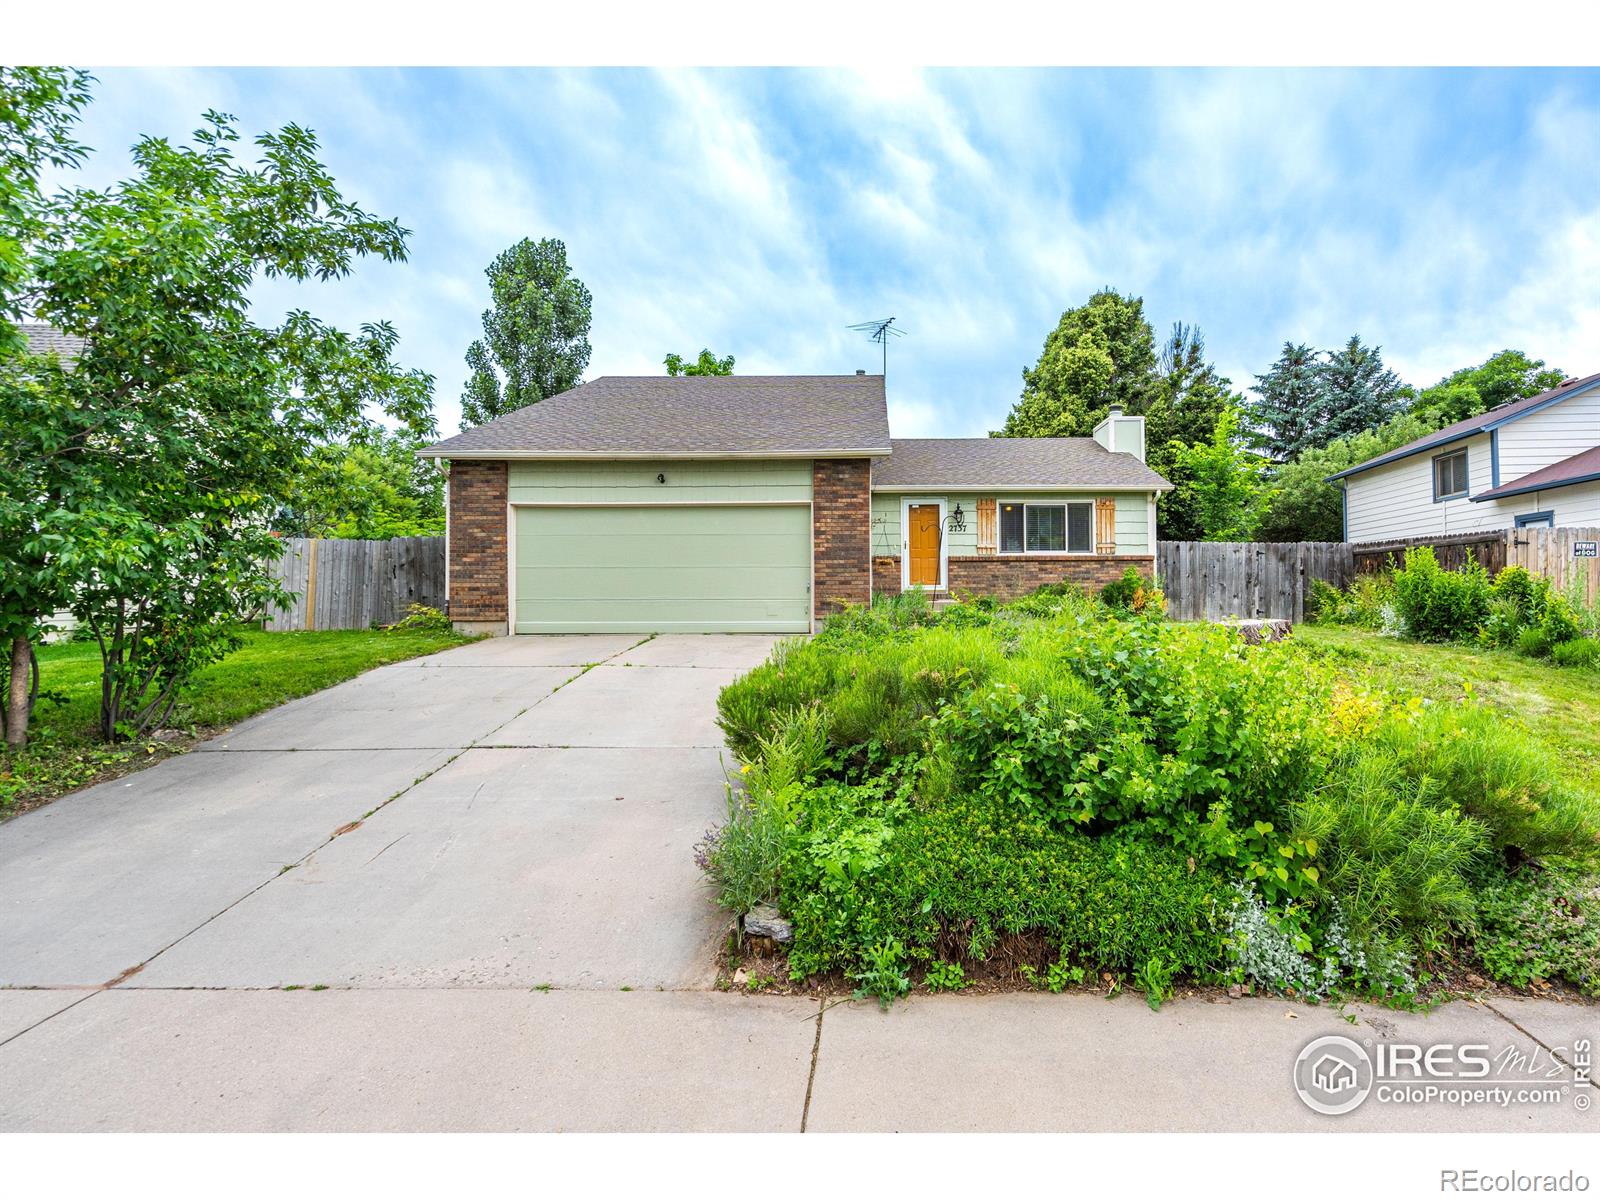 2737  Pampas Drive, fort collins MLS: 123456789990547 Beds: 4 Baths: 2 Price: $540,000